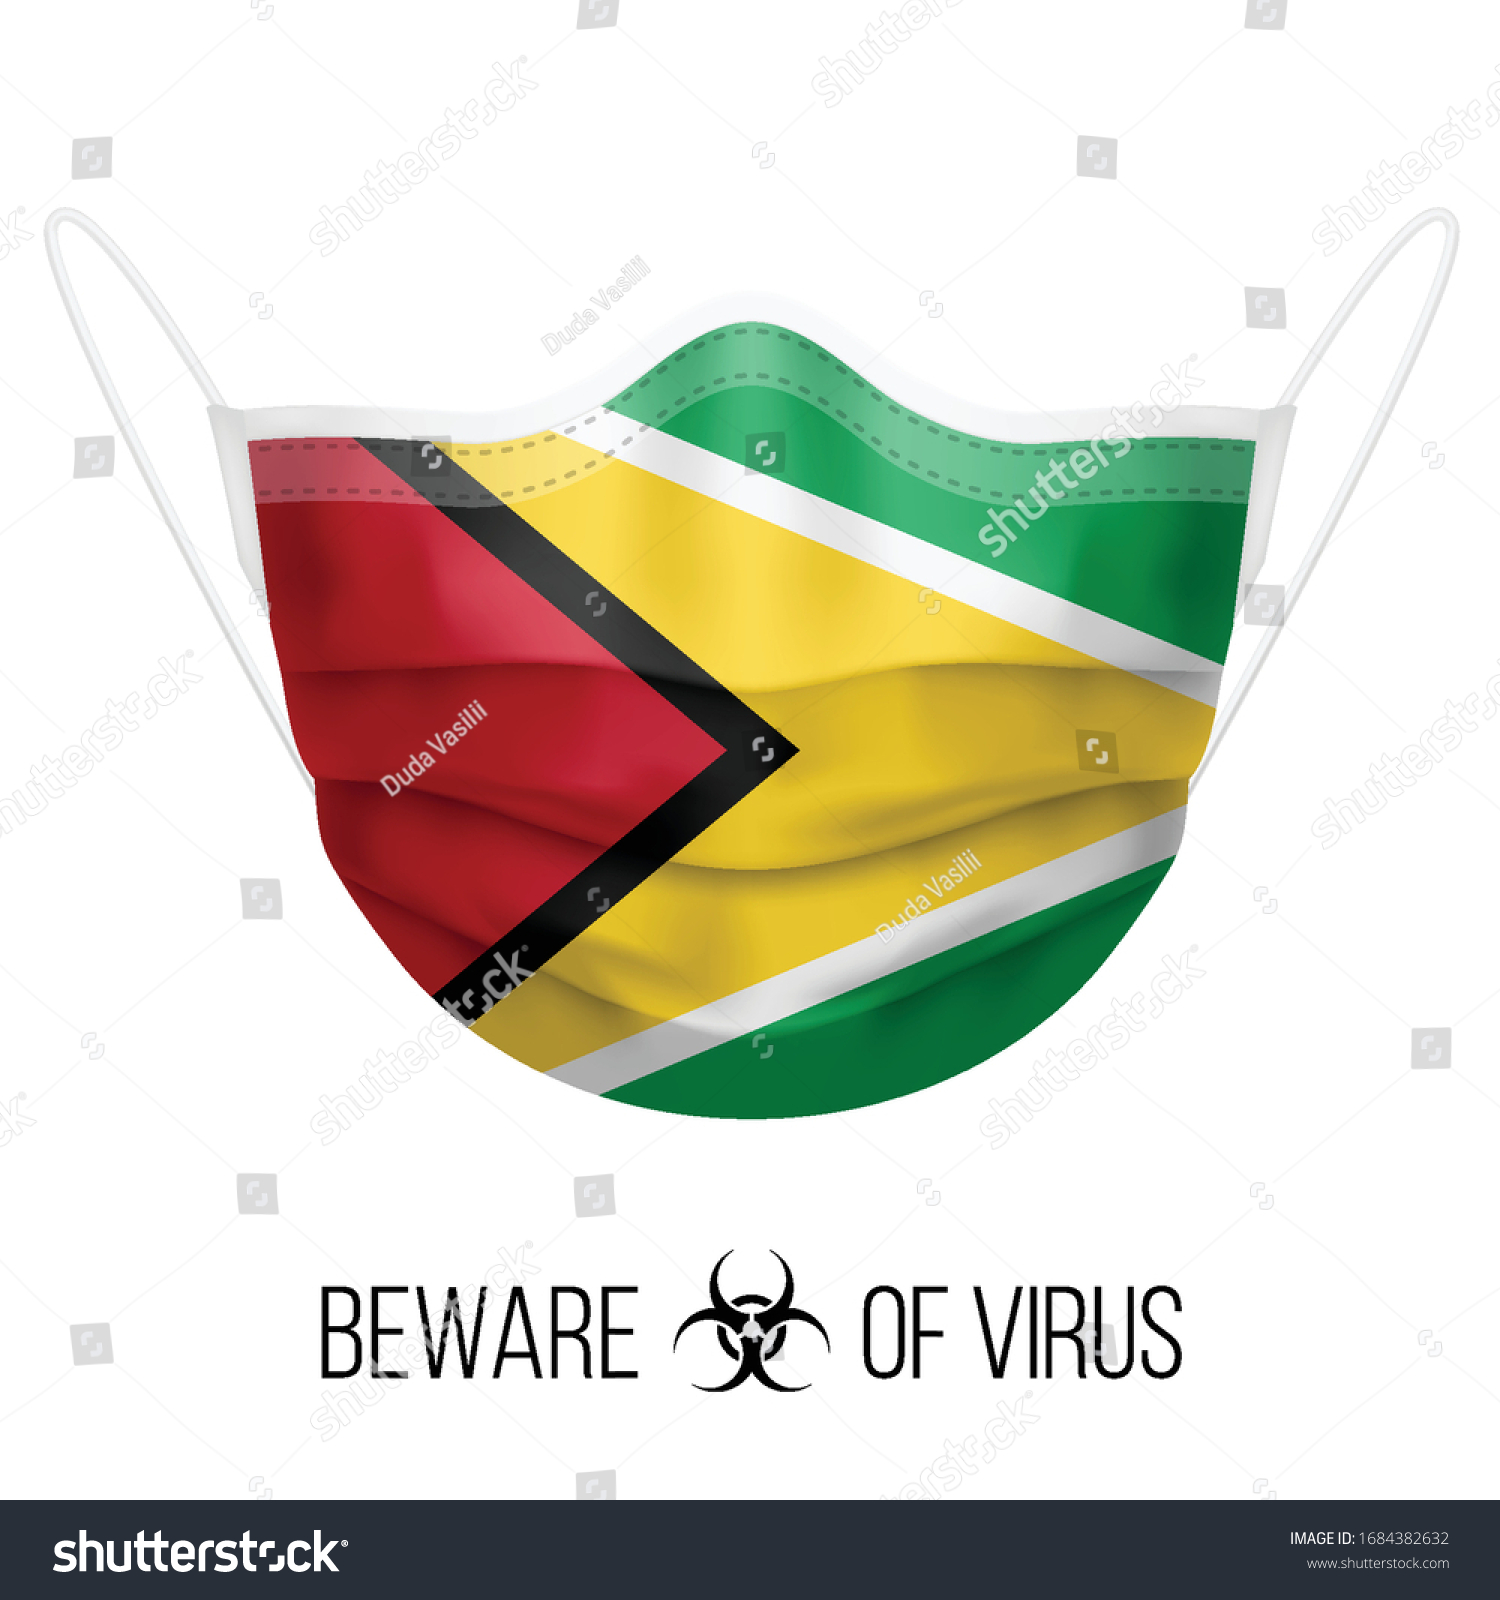 SVG of Medical Mask with National Flag of Guyana as Icon on White. Protective Mask Virus and Flu. Surgery Concept of Health Care Problems and Fight Novel Coronavirus (2019-nCoV) in Form of Guyanese flag svg